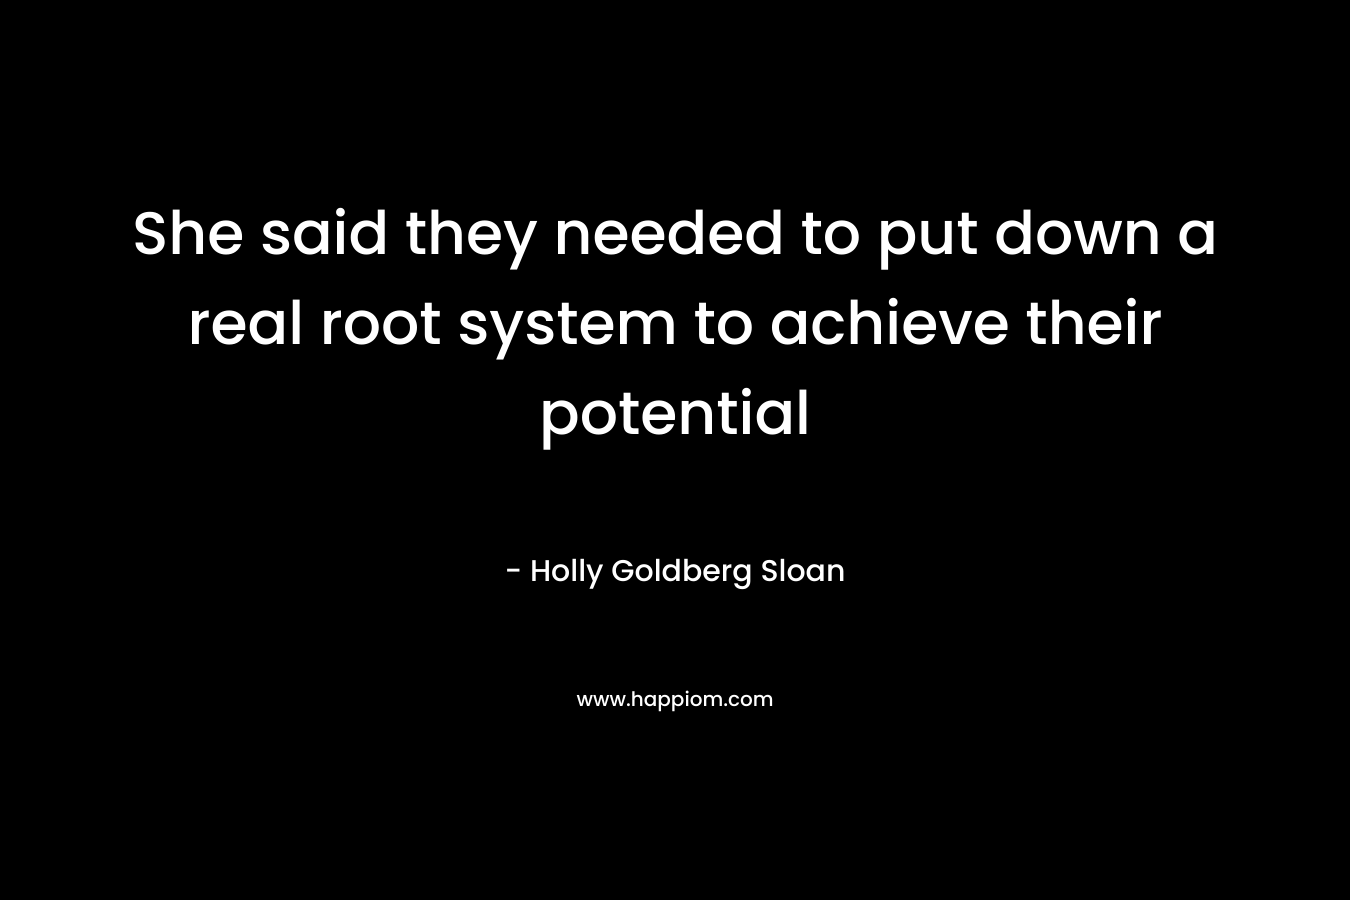 She said they needed to put down a real root system to achieve their potential – Holly Goldberg Sloan